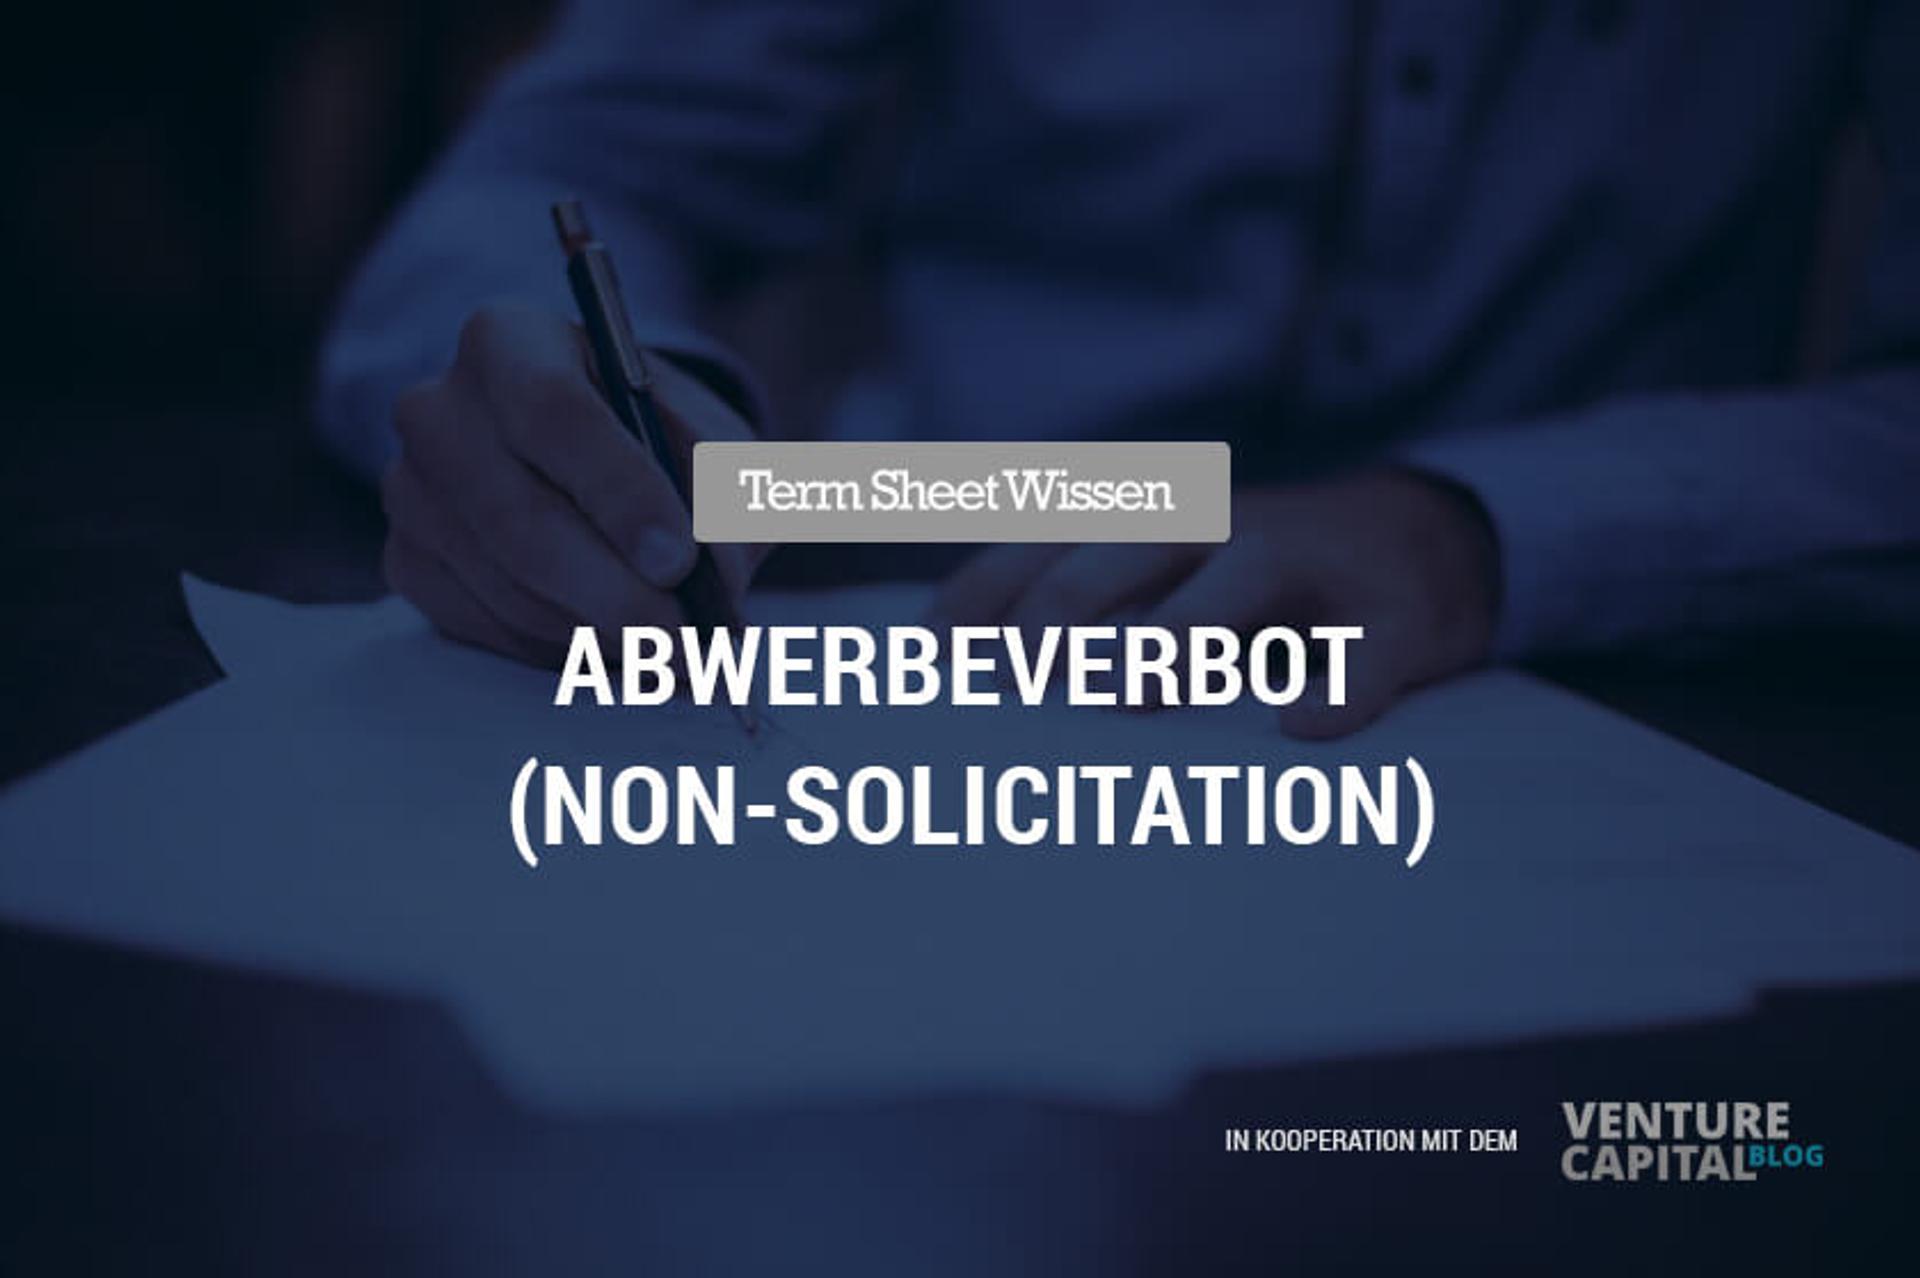 Abwerbeverbot (Non-Solicitation)